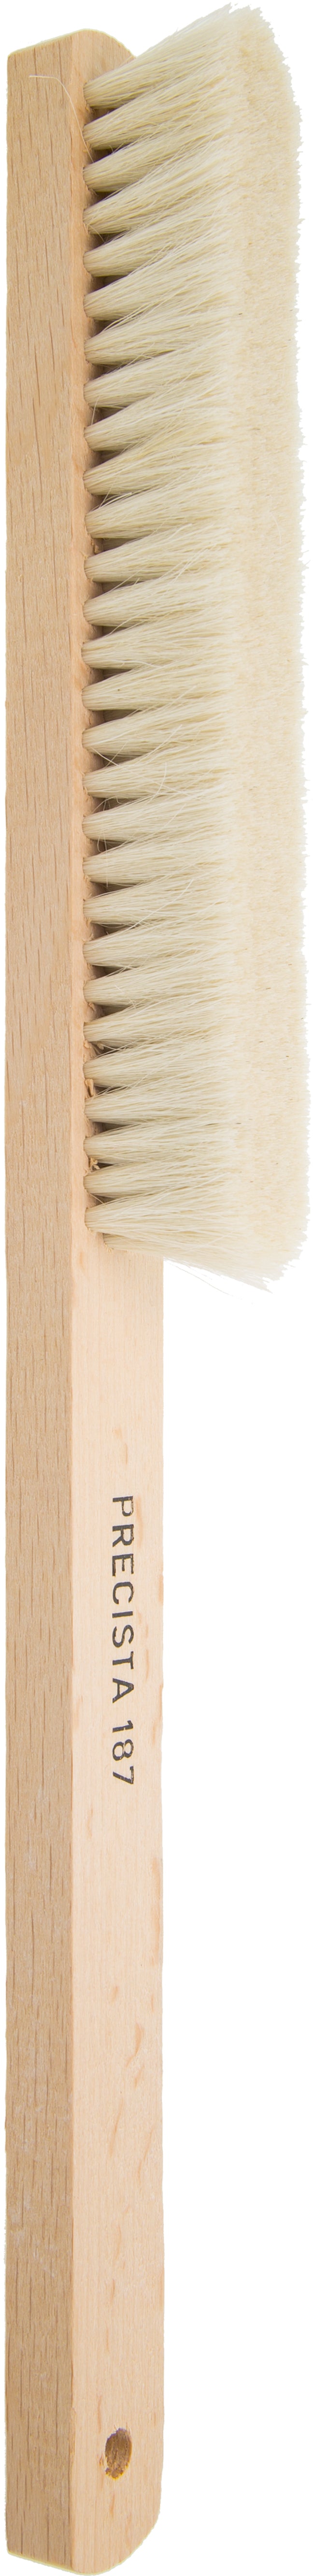 Excelta 187 Brushes - Bench - 4.5" X .5" - Goat Hair Bristles/Wooden Handle - Soft